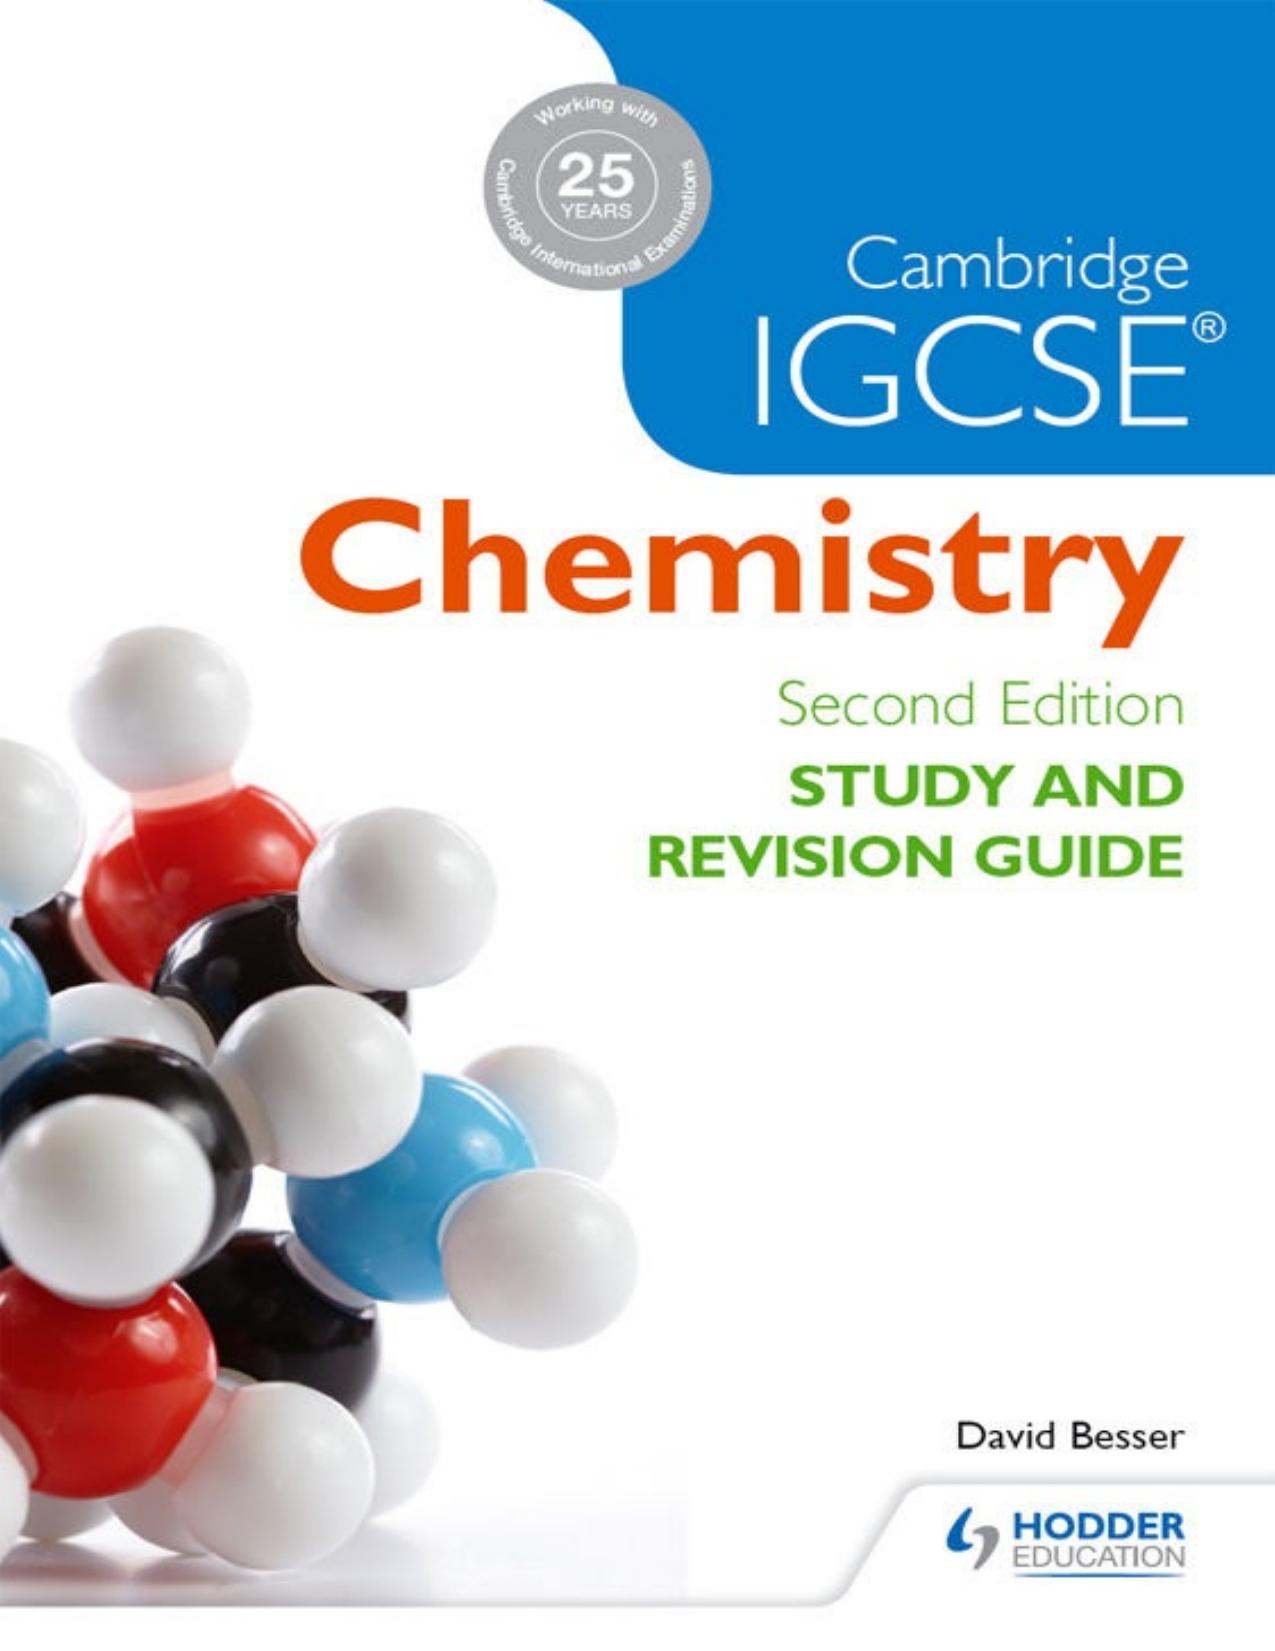 Cambridge IGCSE chemistry study and revision guide - PDFDrive.com